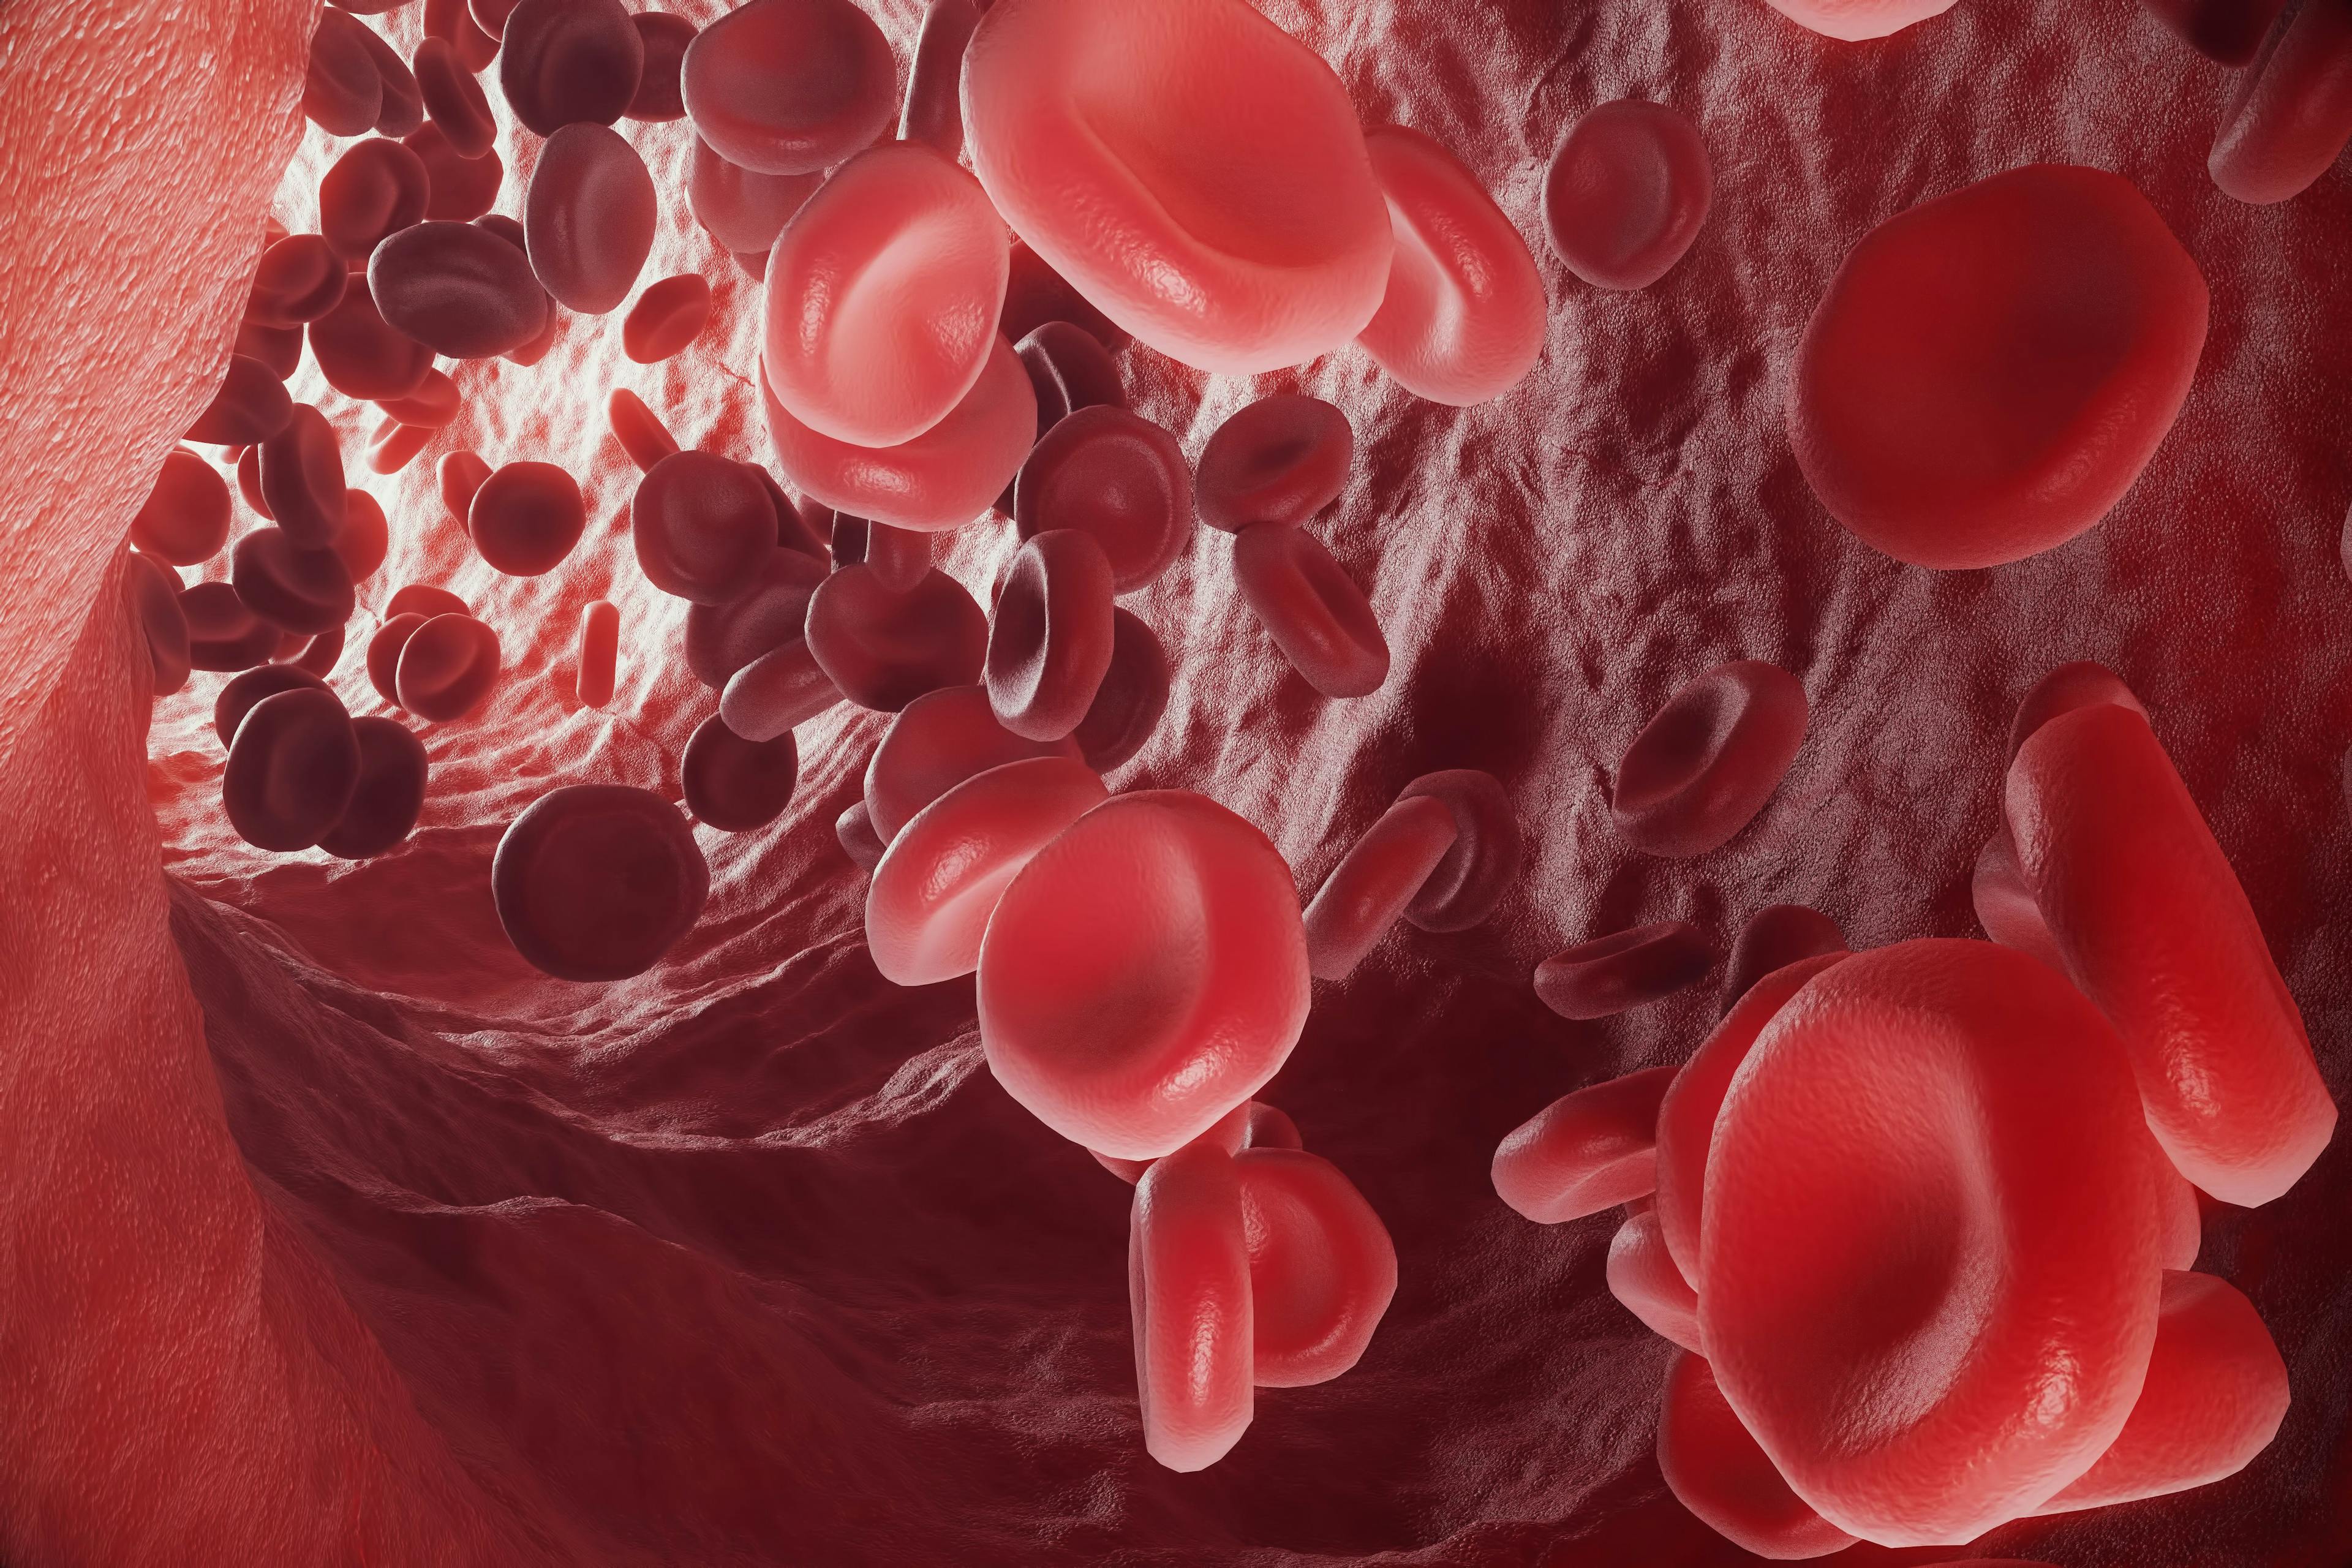 Treatment with ibrutinib with or without rituximab was associated with a lower monthly health care cost compared with chemoimmunotherapy in a population of patients with relapsed/refractory mantle cell lymphoma.